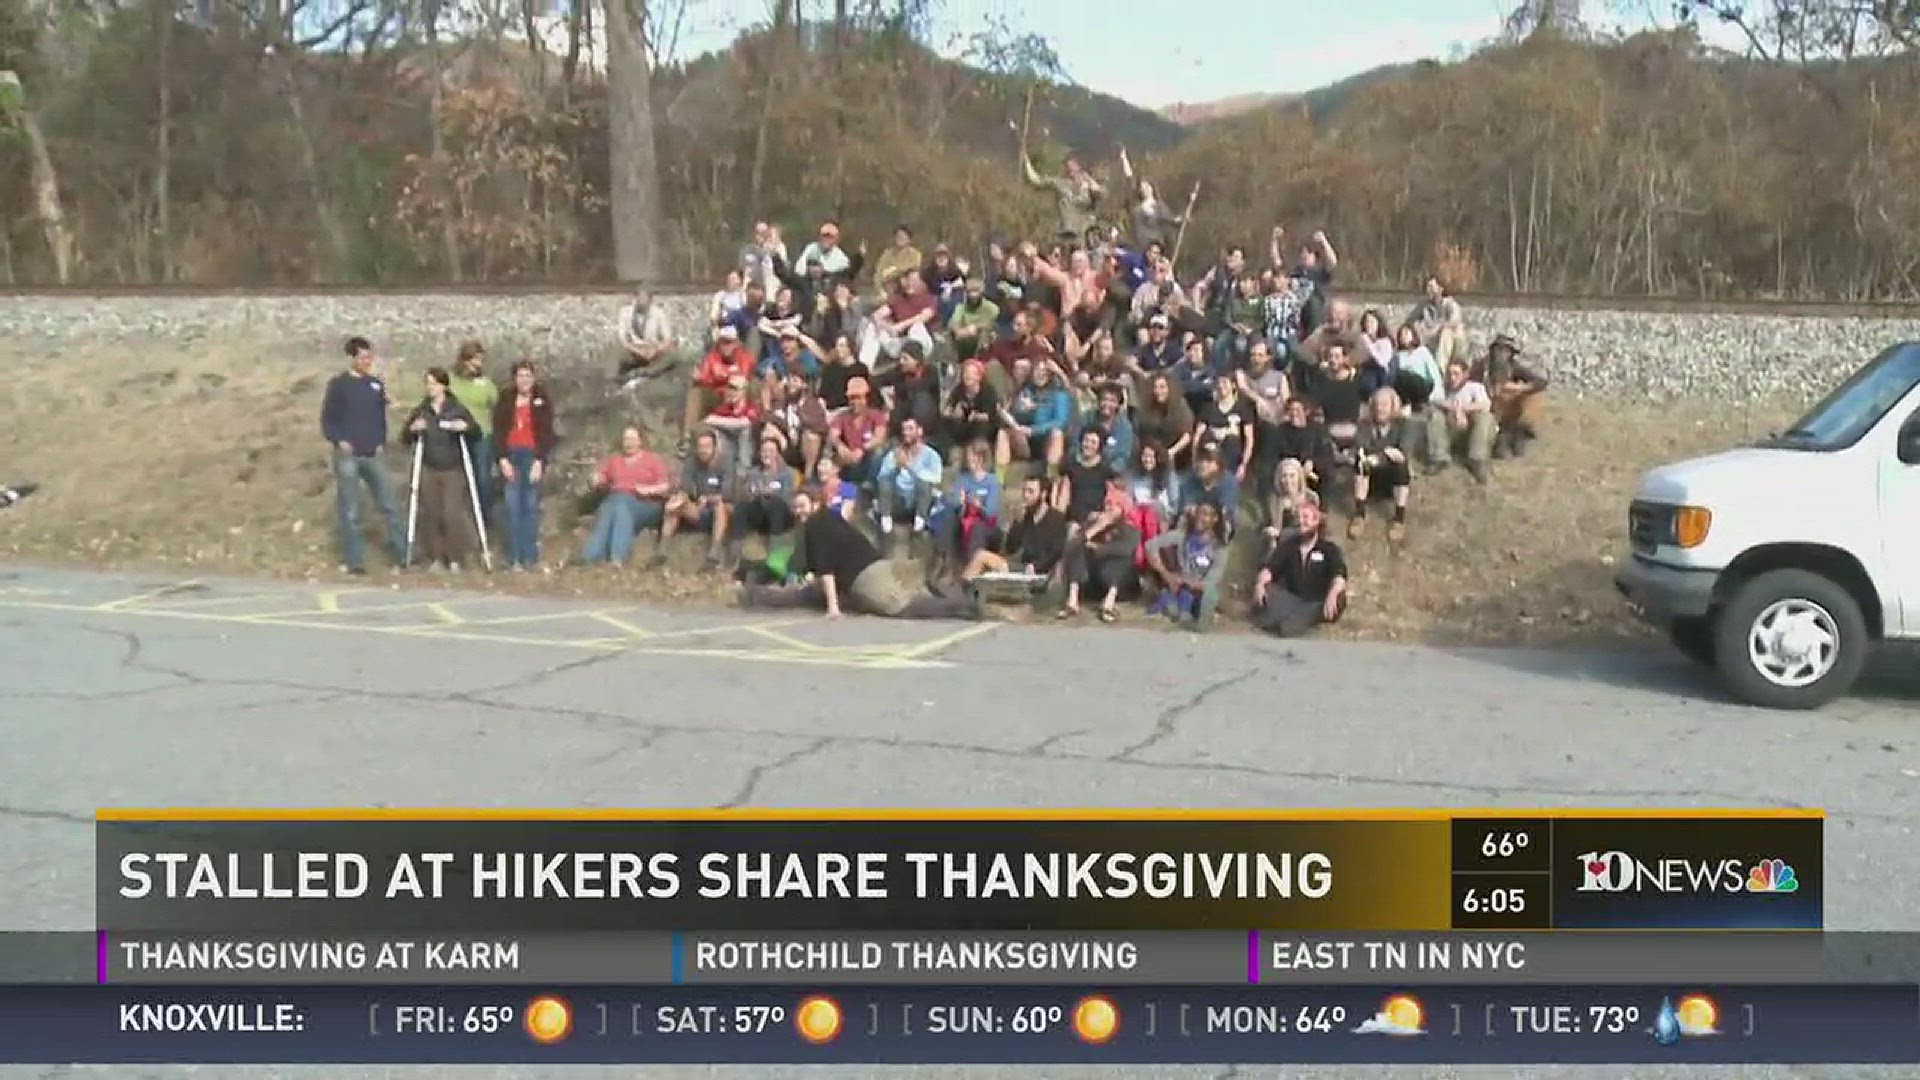 Nov. 24, 2016: Wildfires have closed several miles of the Appalachian Trail, leaving thru-hikers stalled on Thanksgiving, just shy of completing their trek.